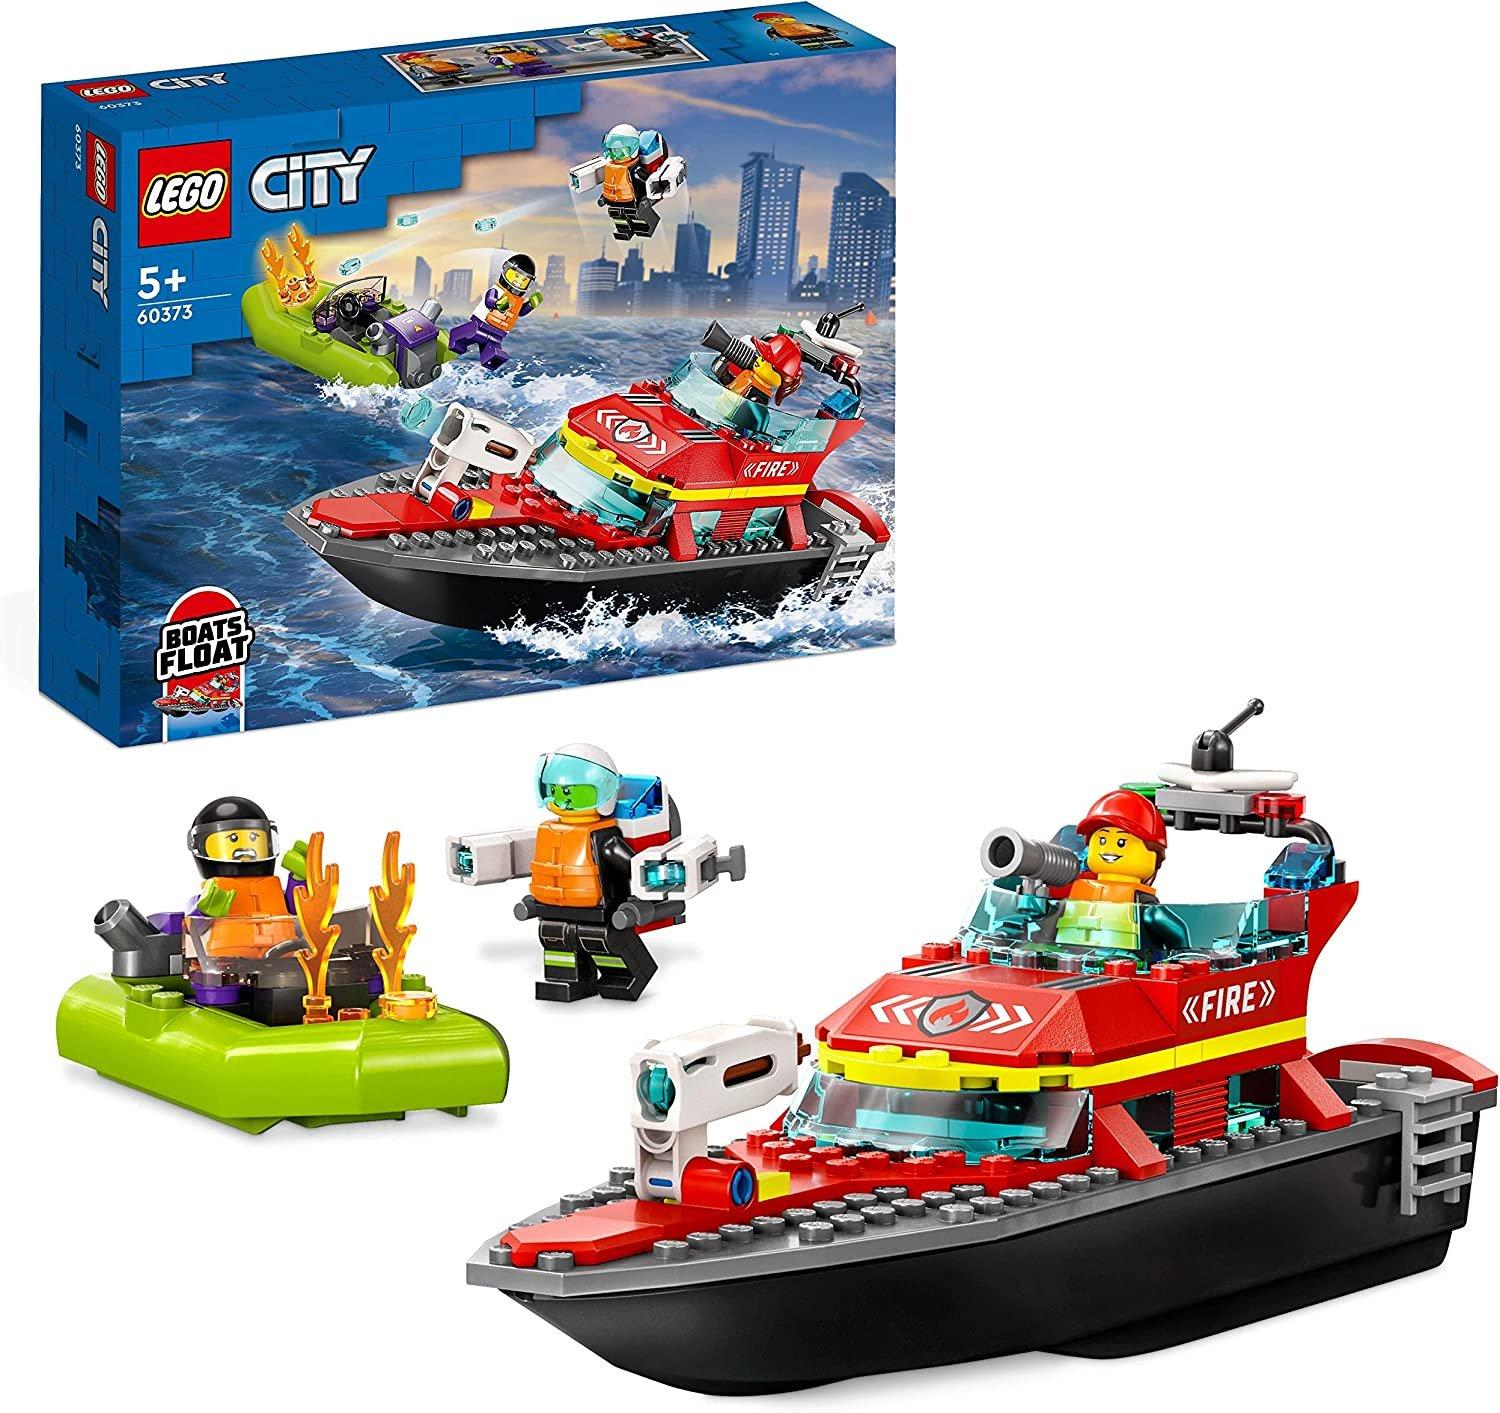 60373 City Fire Rescue Boat Toy